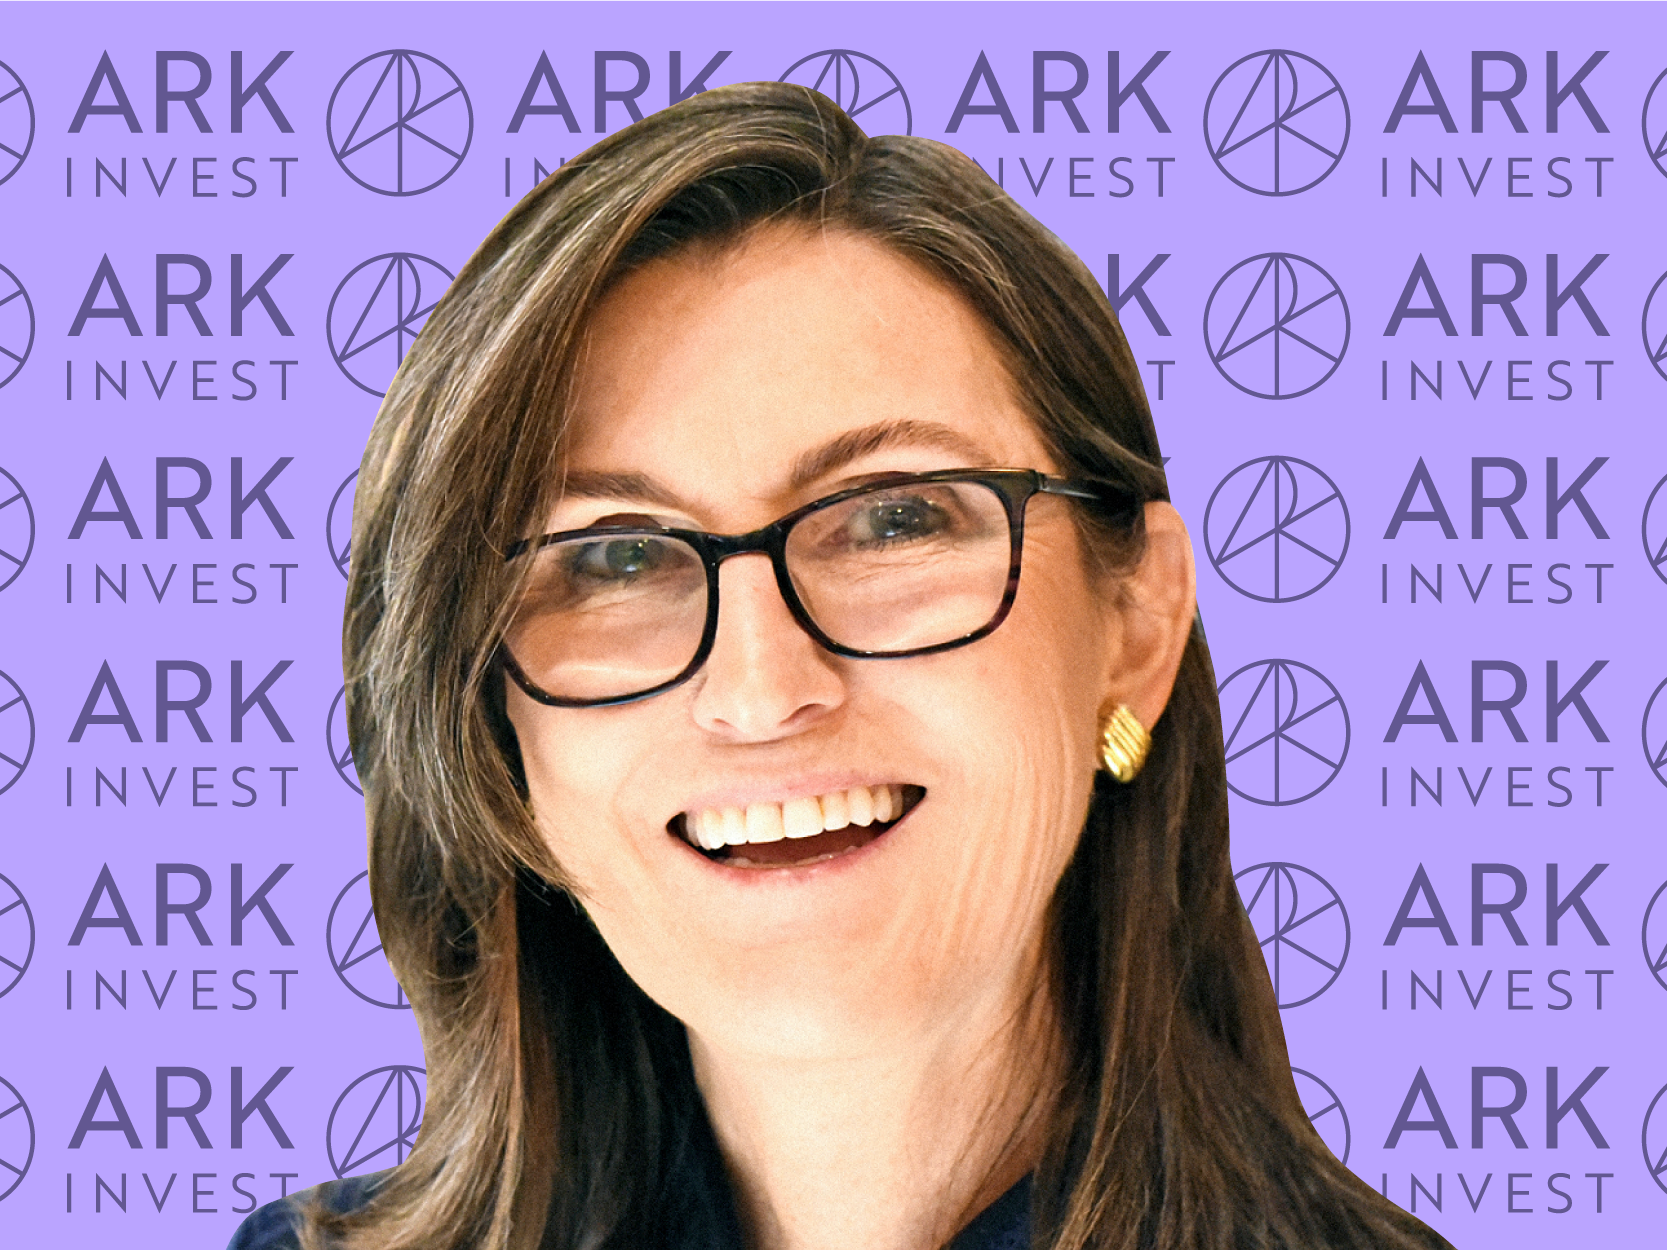 Cathie Wood, CEO and chief investment officer of ARK Invest, on a purple background with the Ark Invest logos patterned behind her.